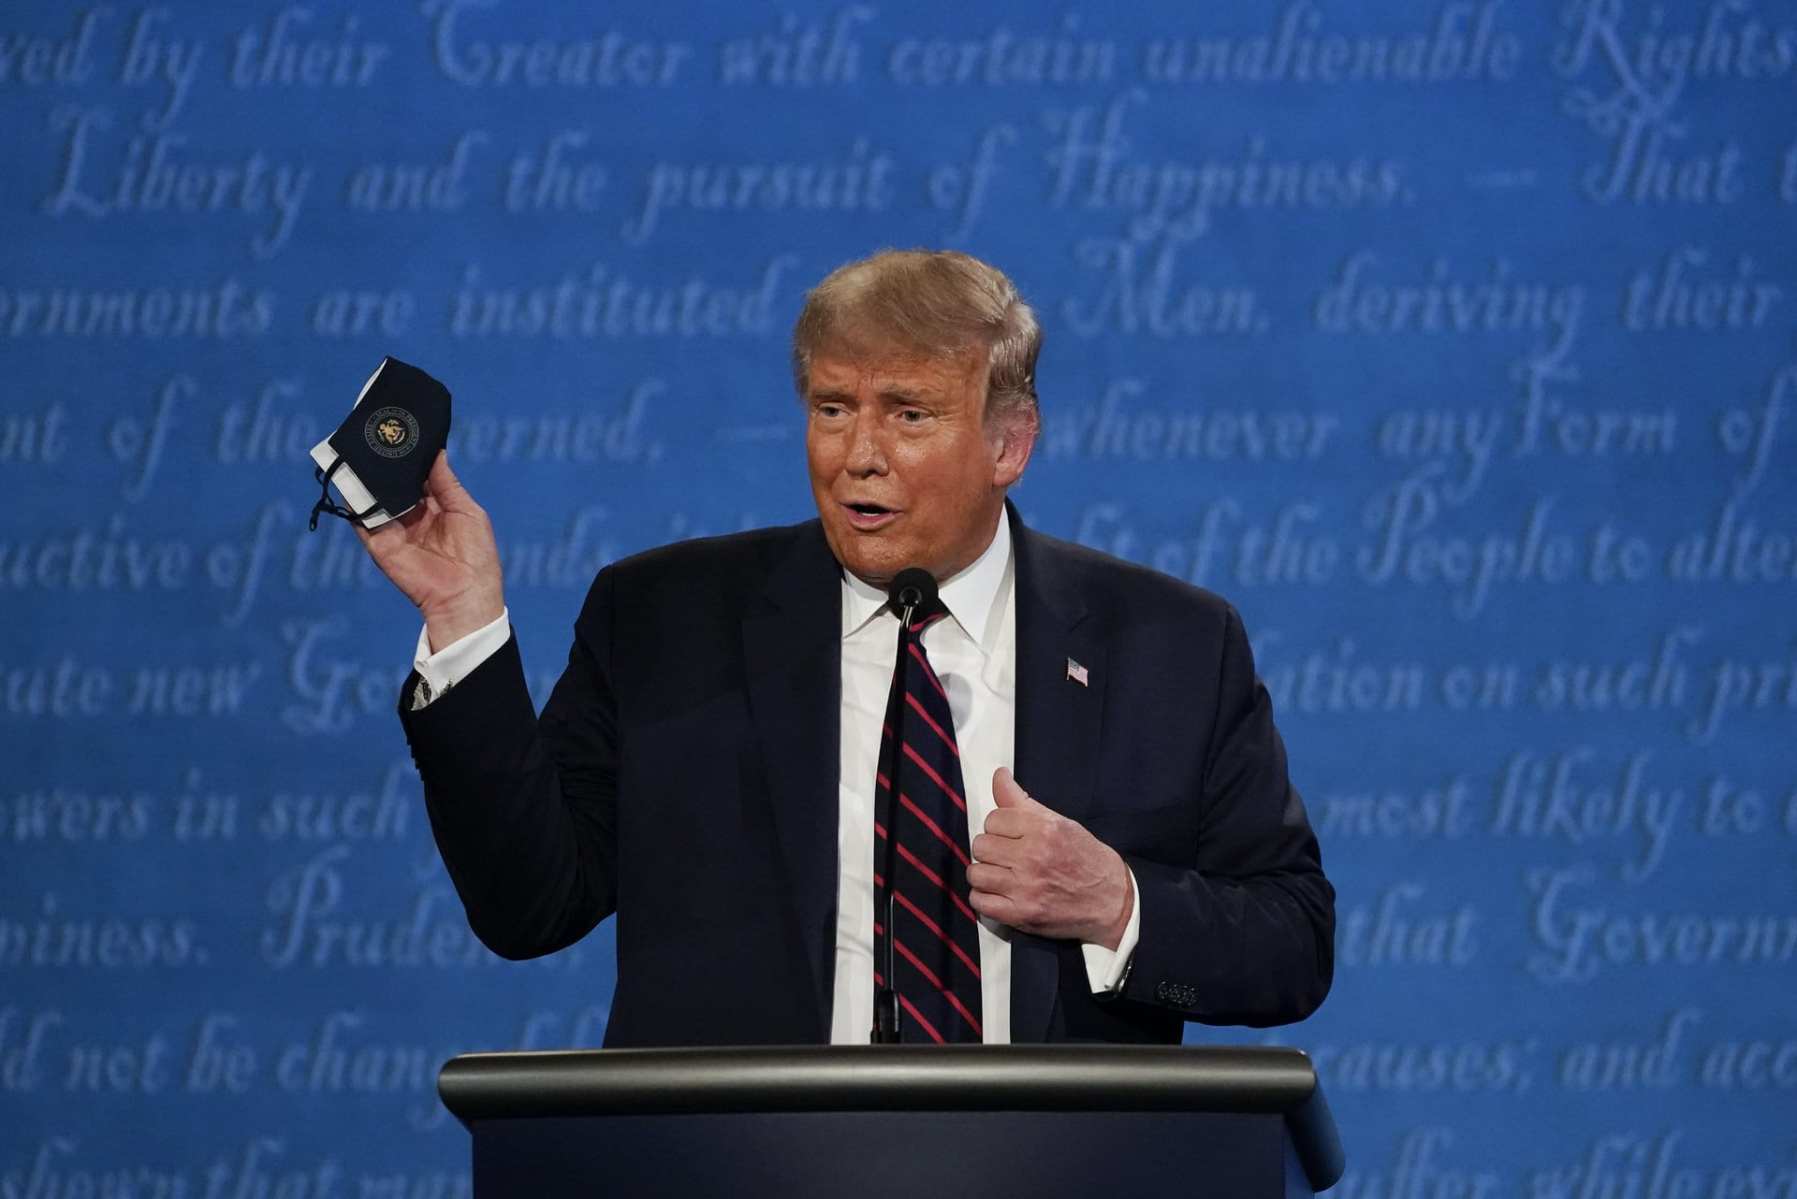 In this Sept. 29, 2020, file photo, President Donald Trump holds up his facemask during the first presidential debate at Case Western University and Cleveland Clinic, in Cleveland, Ohio. President Trump and first lady Melania Trump have tested positive for the coronavirus, the president tweeted early Friday. In this (AP Photo/Julio Cortez, File)